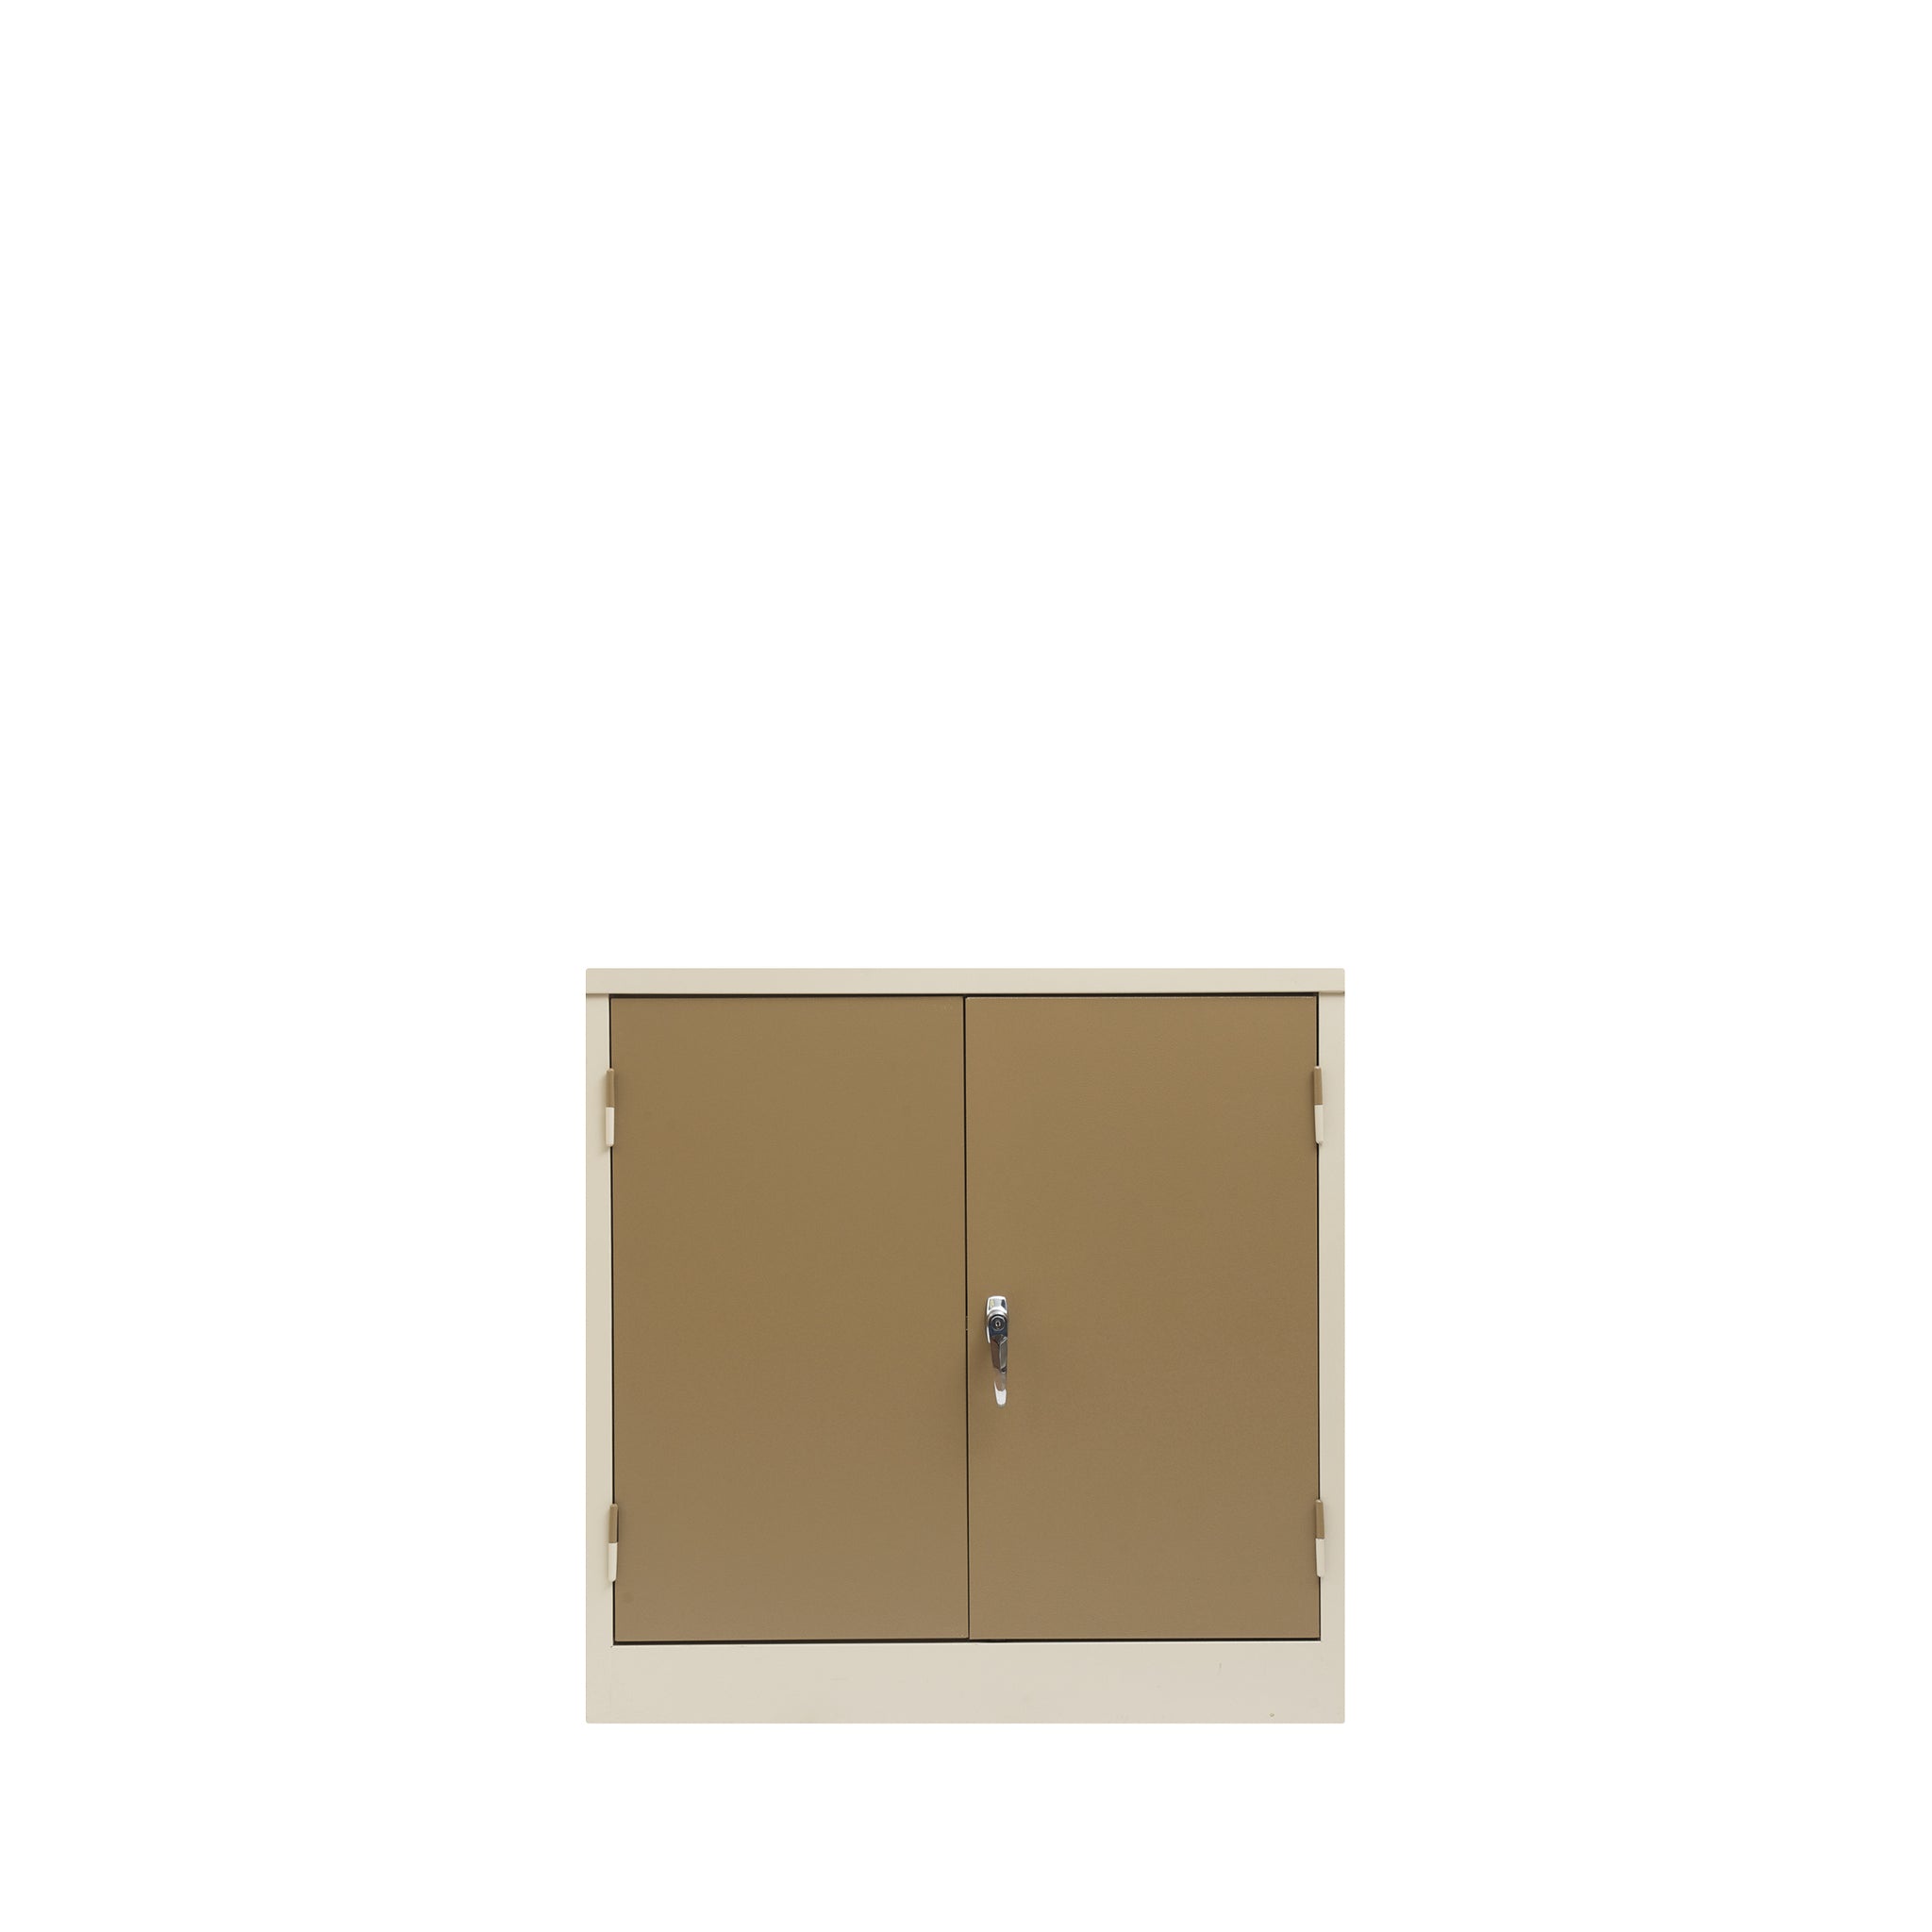 Hedcor stationary cupboards